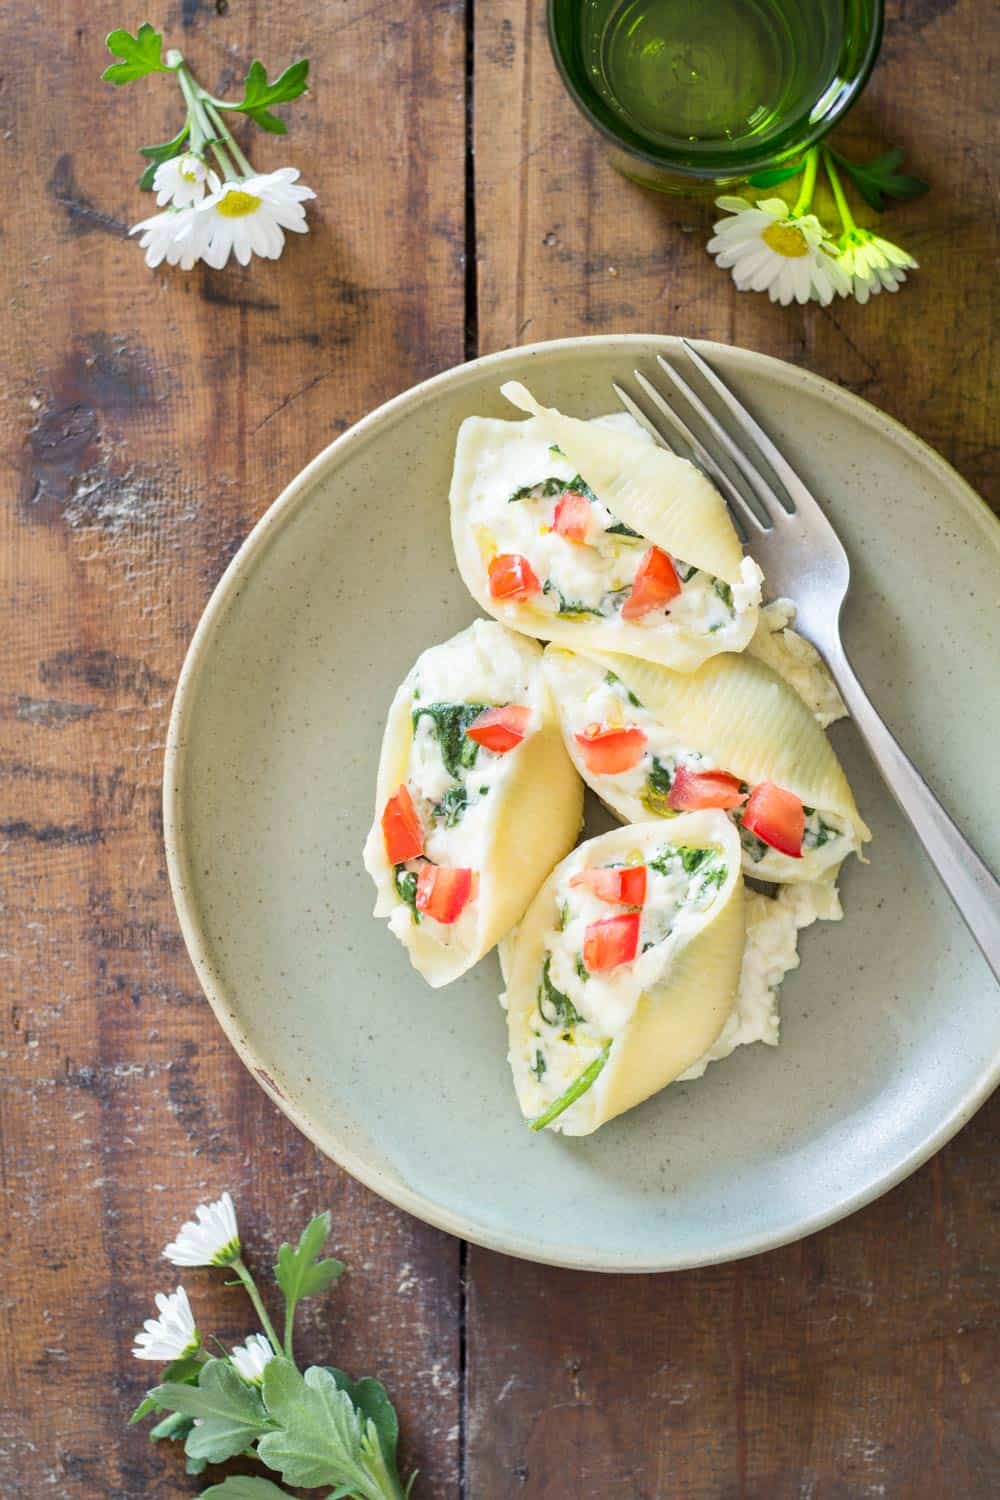 Spinach Ricotta Stuffed Shells on a plate with a fork, on a wooden table with flowers.